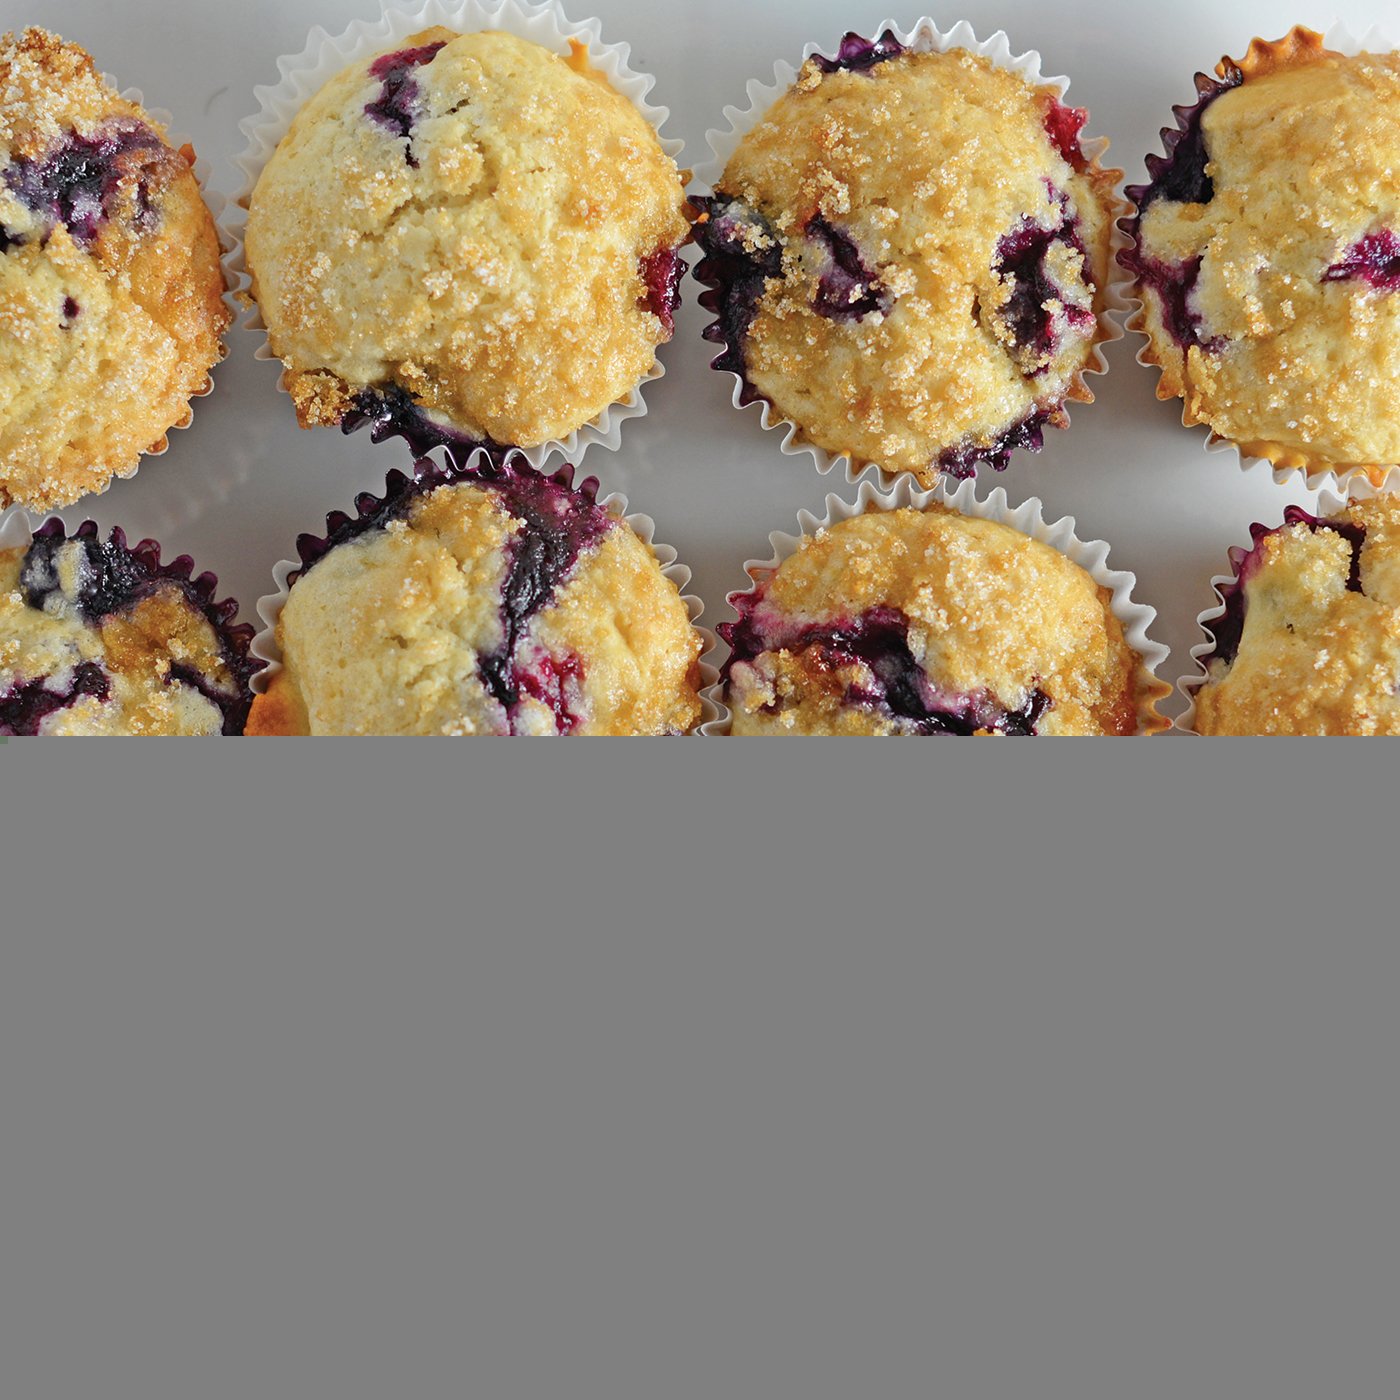 Homemade Blueberry Muffins with Crumb Topping is a super easy recipe for super soft muffins! They're delightfully light and full of flavor!  #homemadeblueberrymuffins #bestblueberrymuffins www.savoryexperiments.com